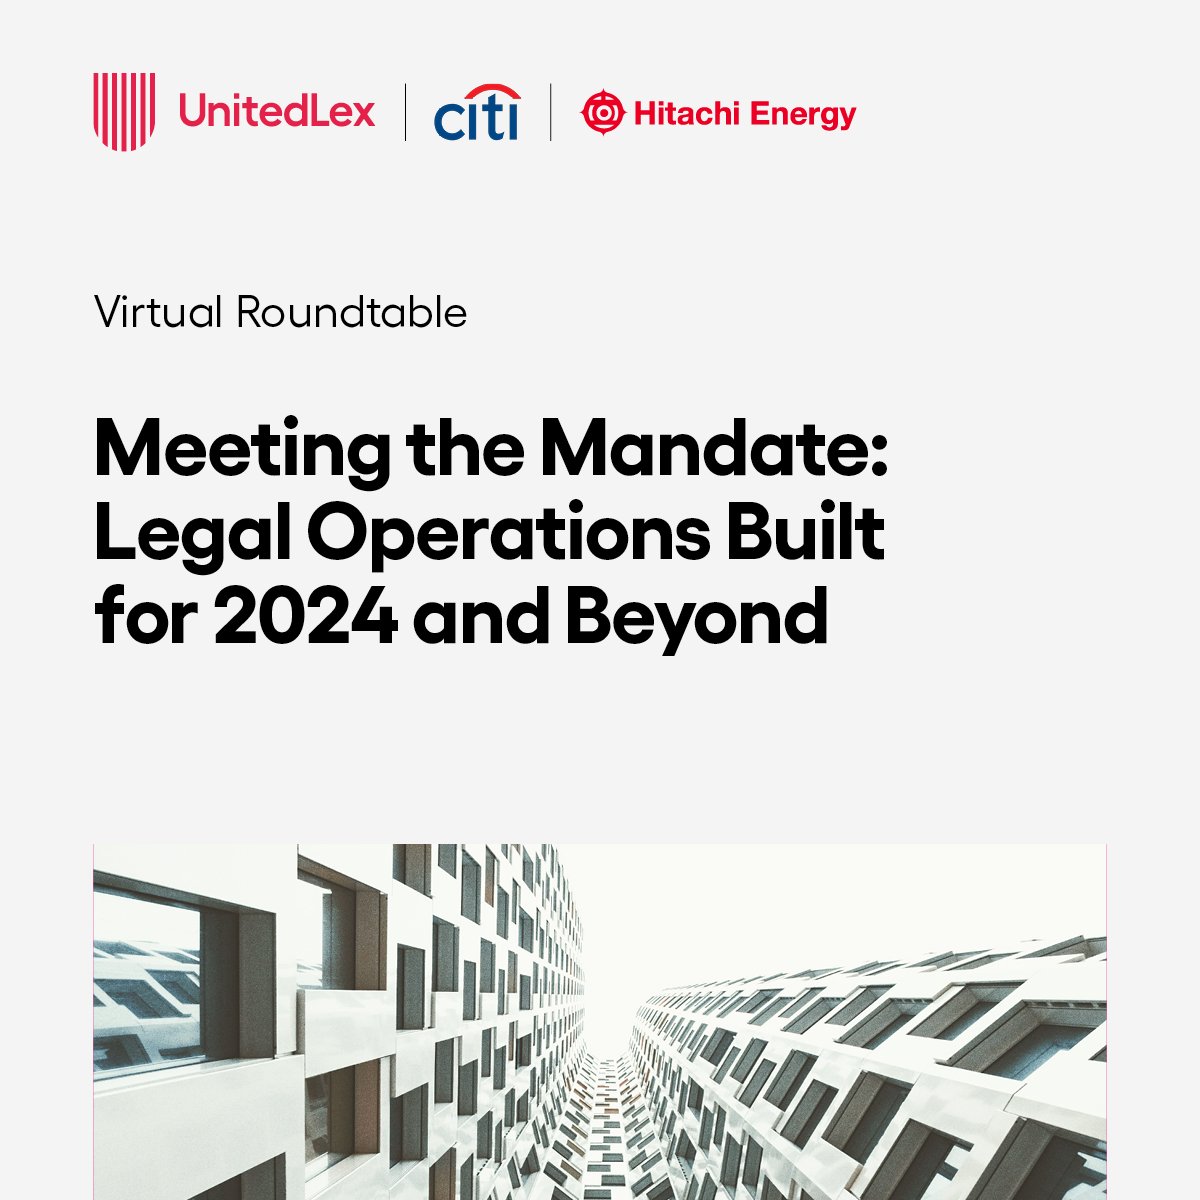 Registration is open for 'Meeting the Mandate: Legal Operations Built for 2024 and Beyond'! Reserve you place to hear industry leaders from Hitachi Energy, Citi, and UnitedLex share their proven best practices for building a future-ready legal department: hubs.li/Q02q8KBj0